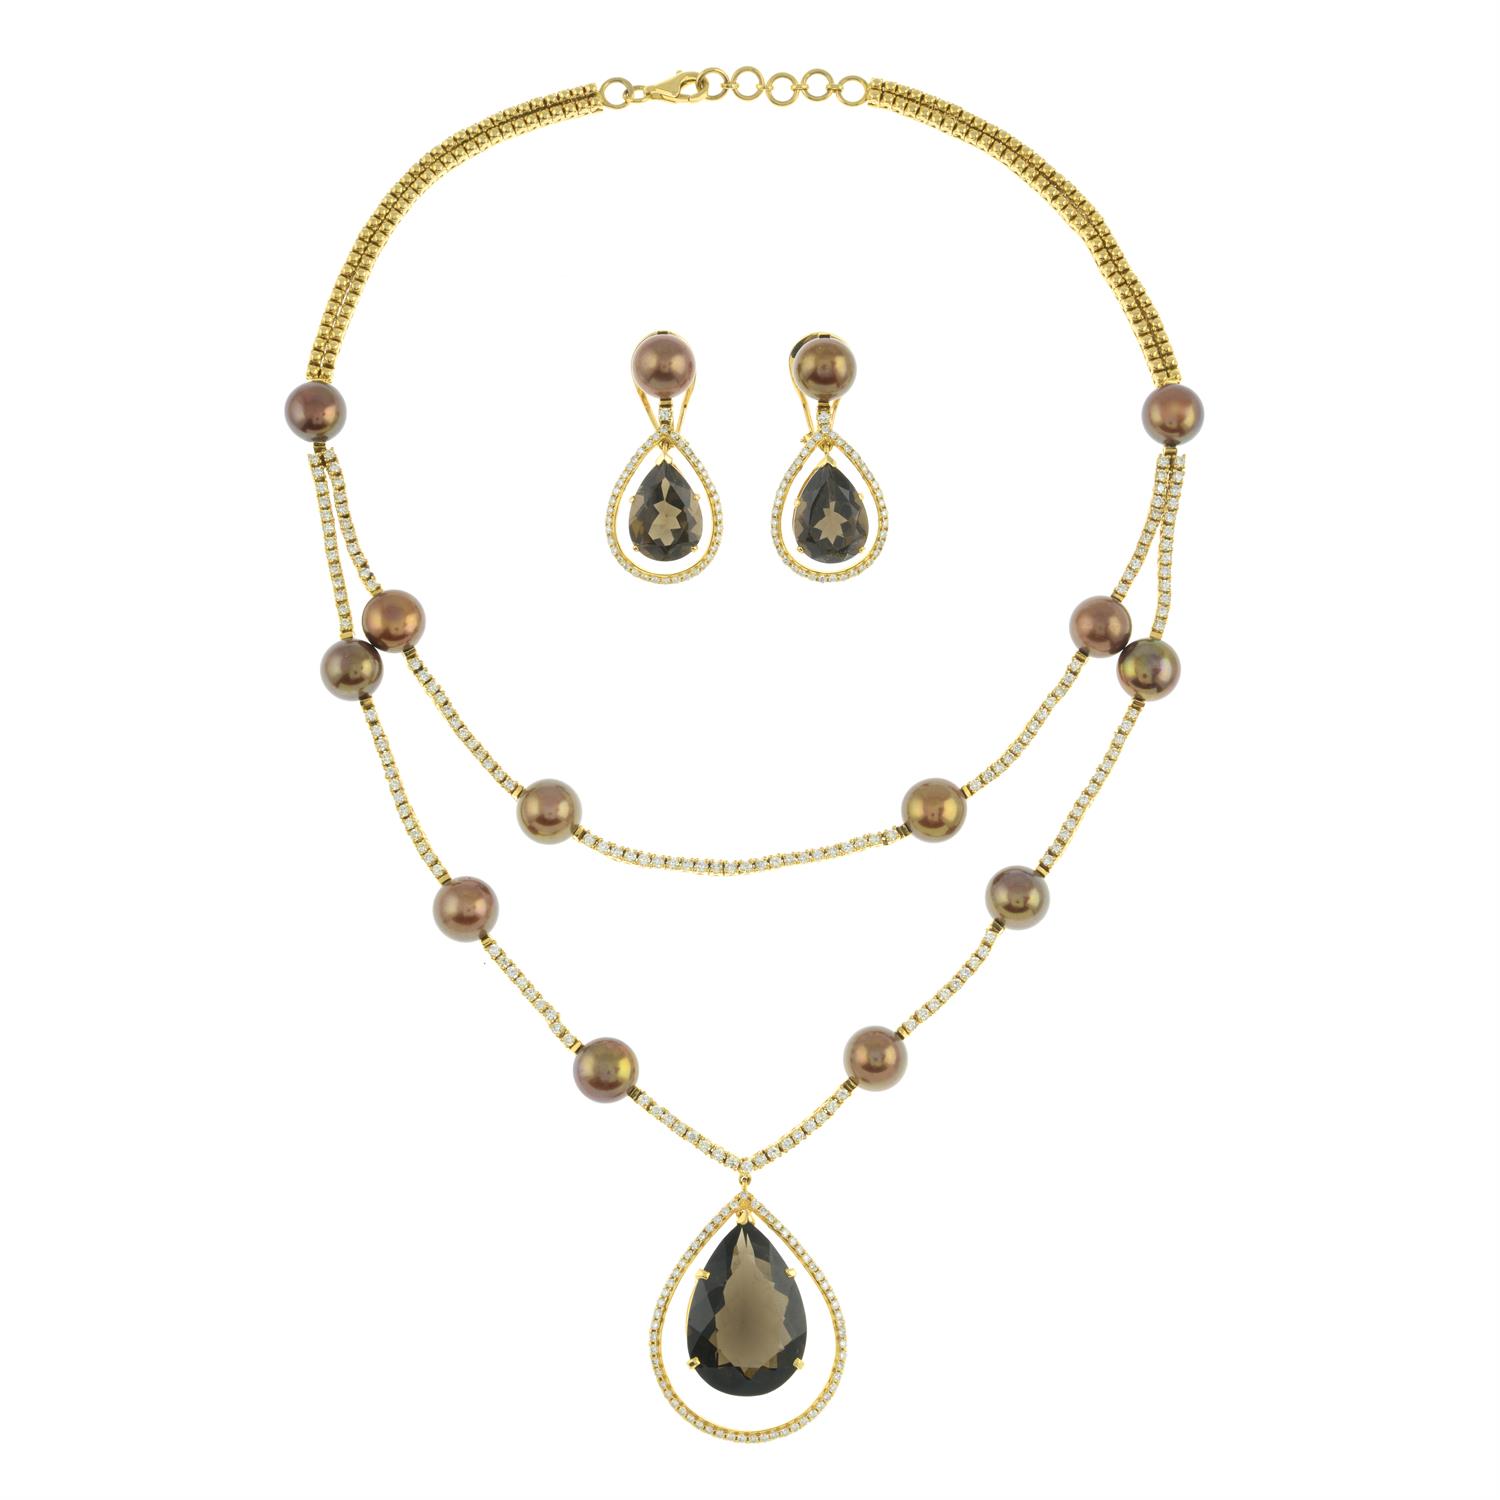 Diamond and gem necklace, with matching earrings - Image 2 of 8